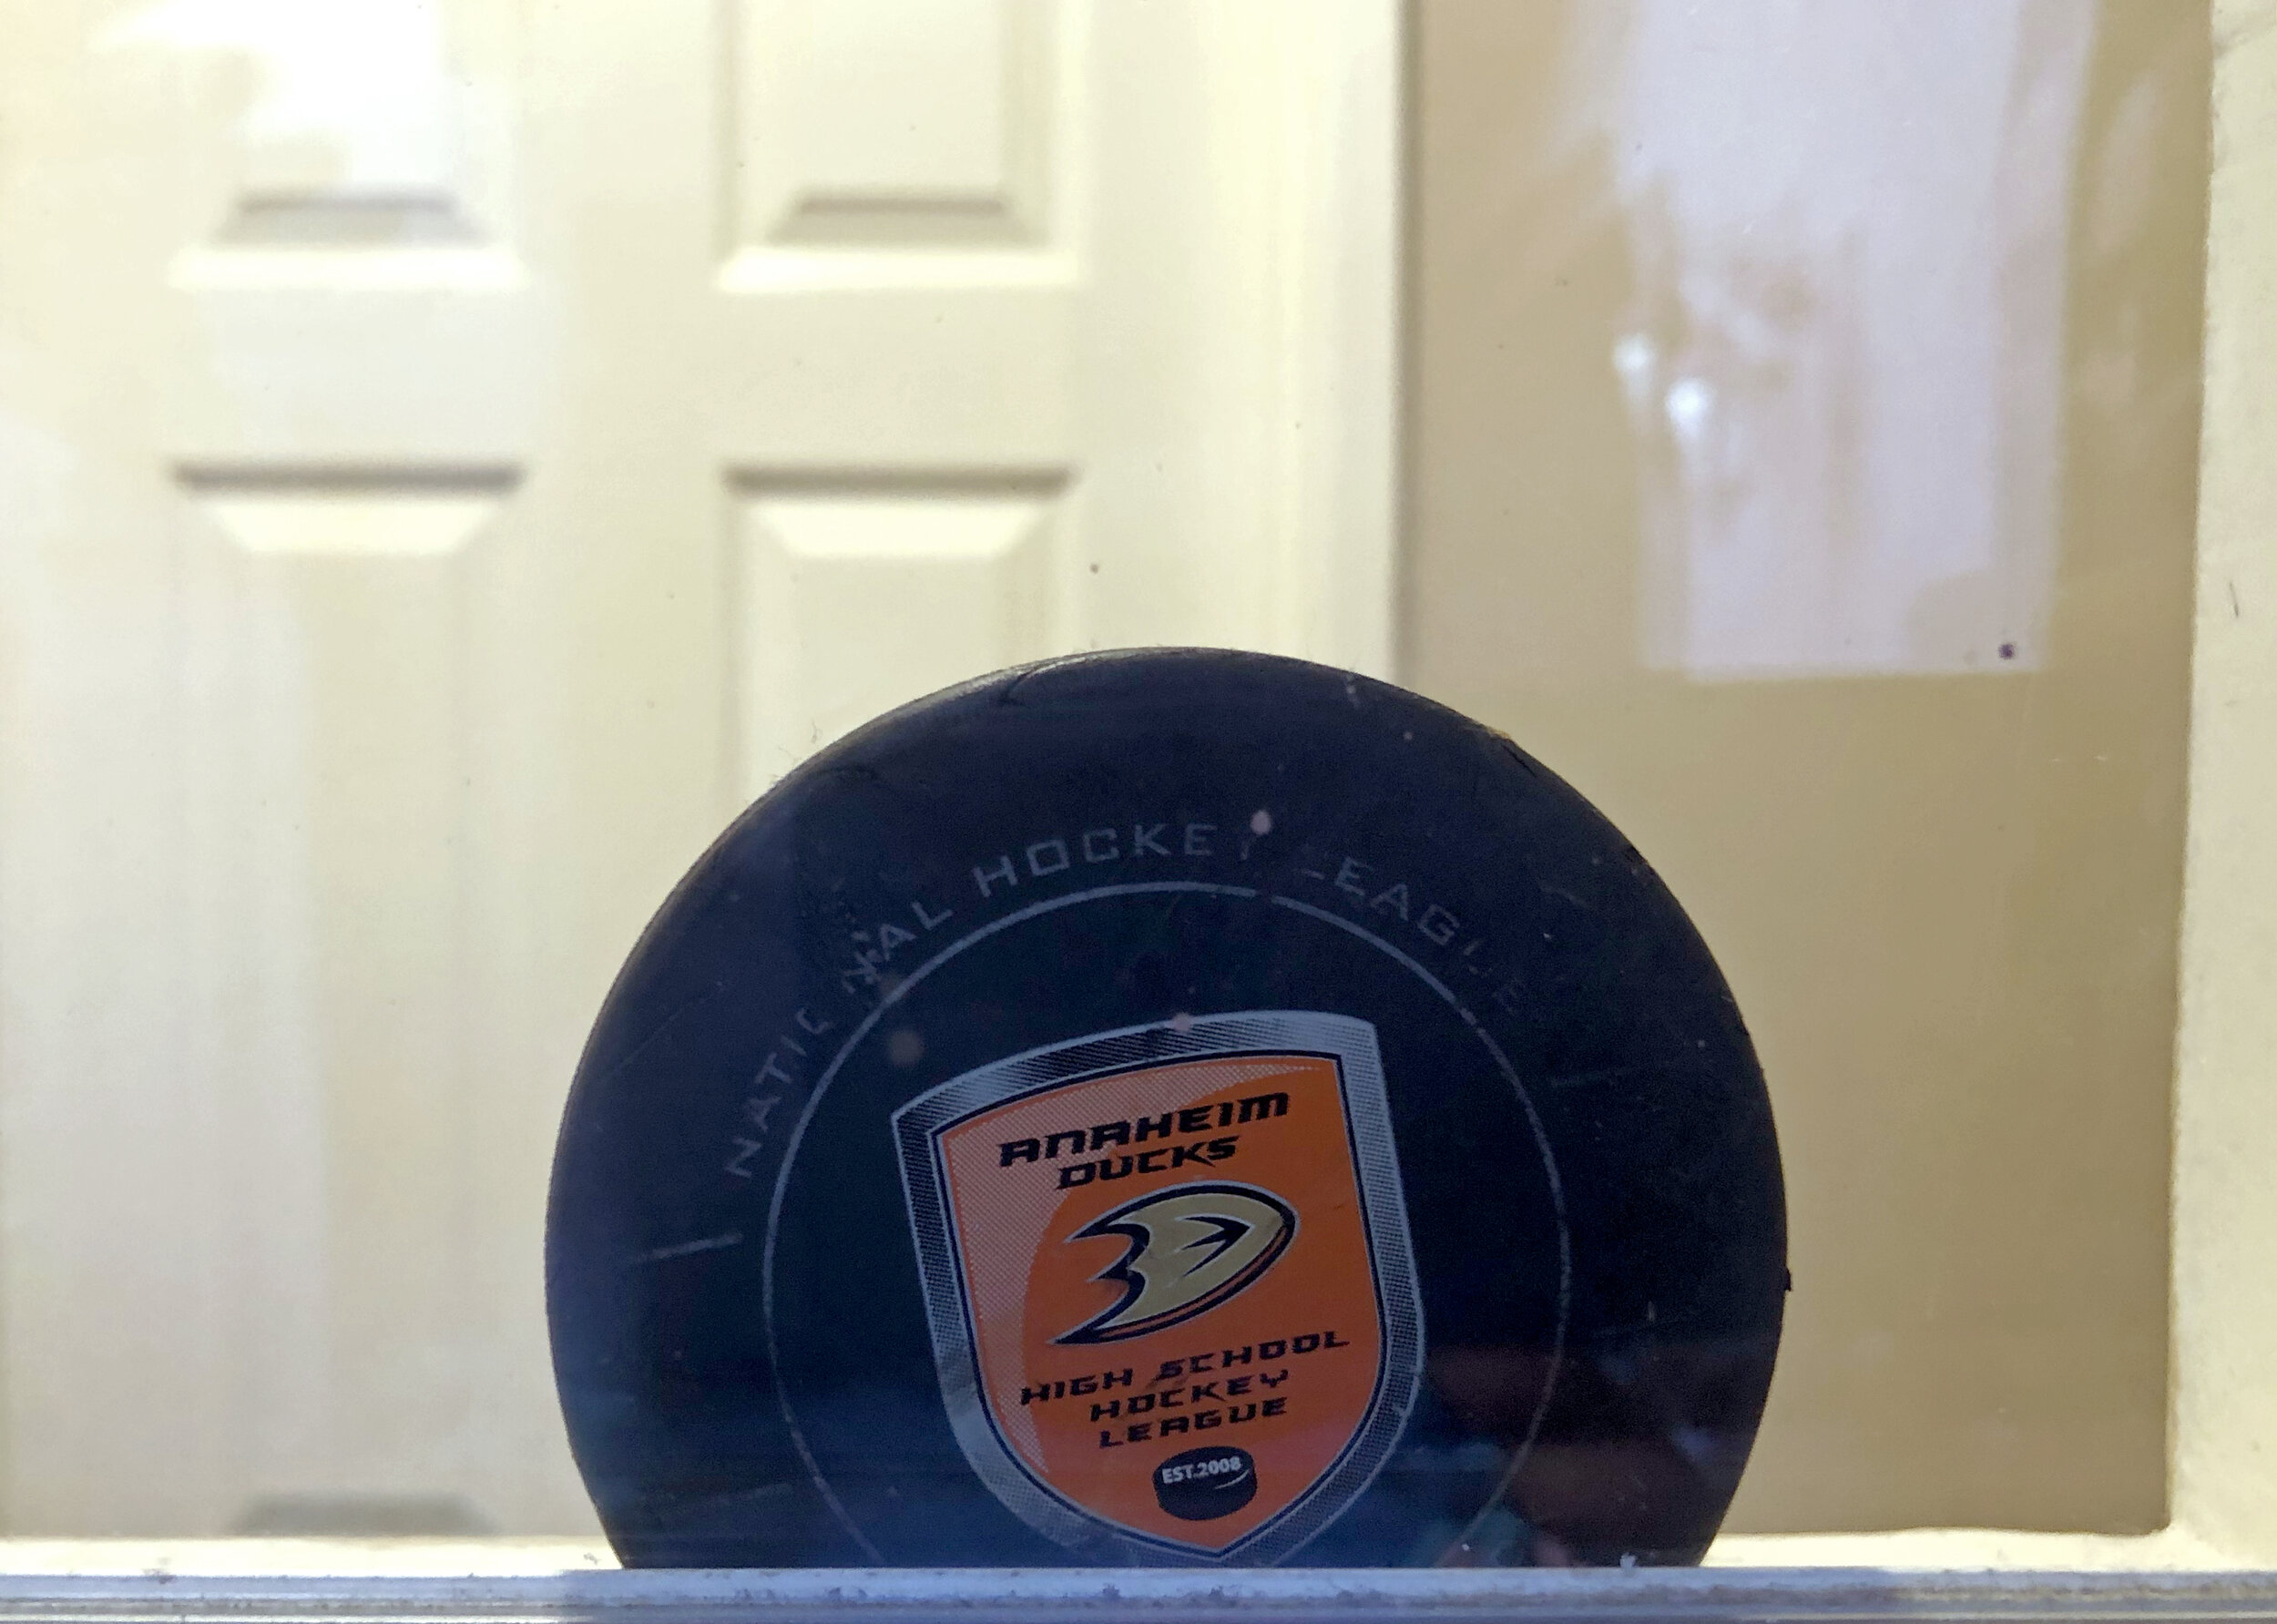 The evolution of the hockey puck Good by alexhockeybeast on emaze